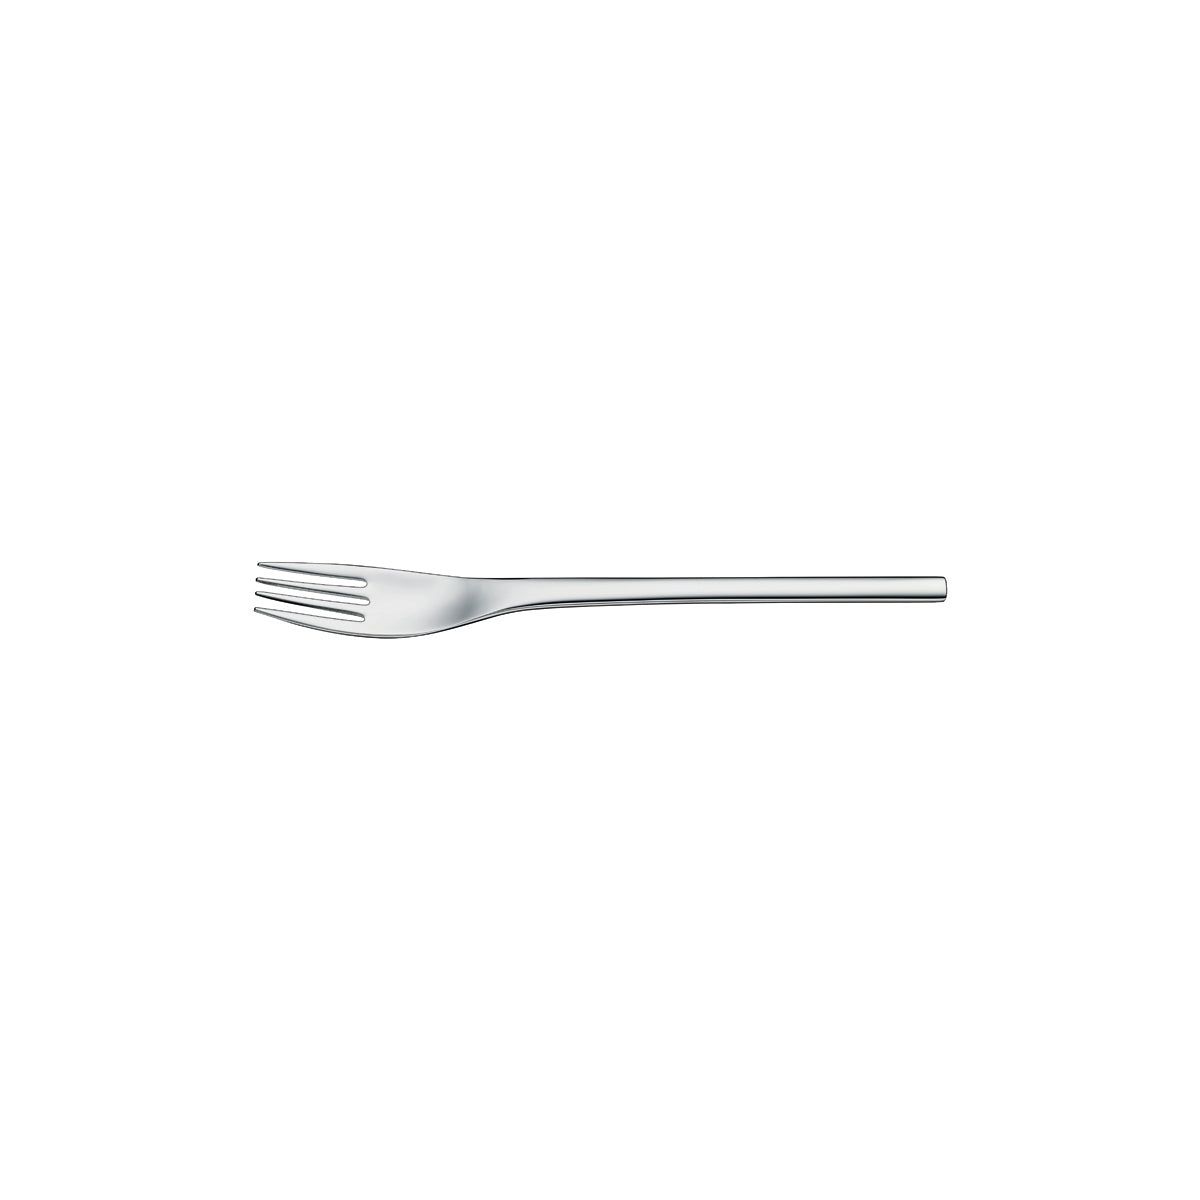 54.7202.6030 WMF Nordic Table Fork Silverplated Tomkin Australia Hospitality Supplies